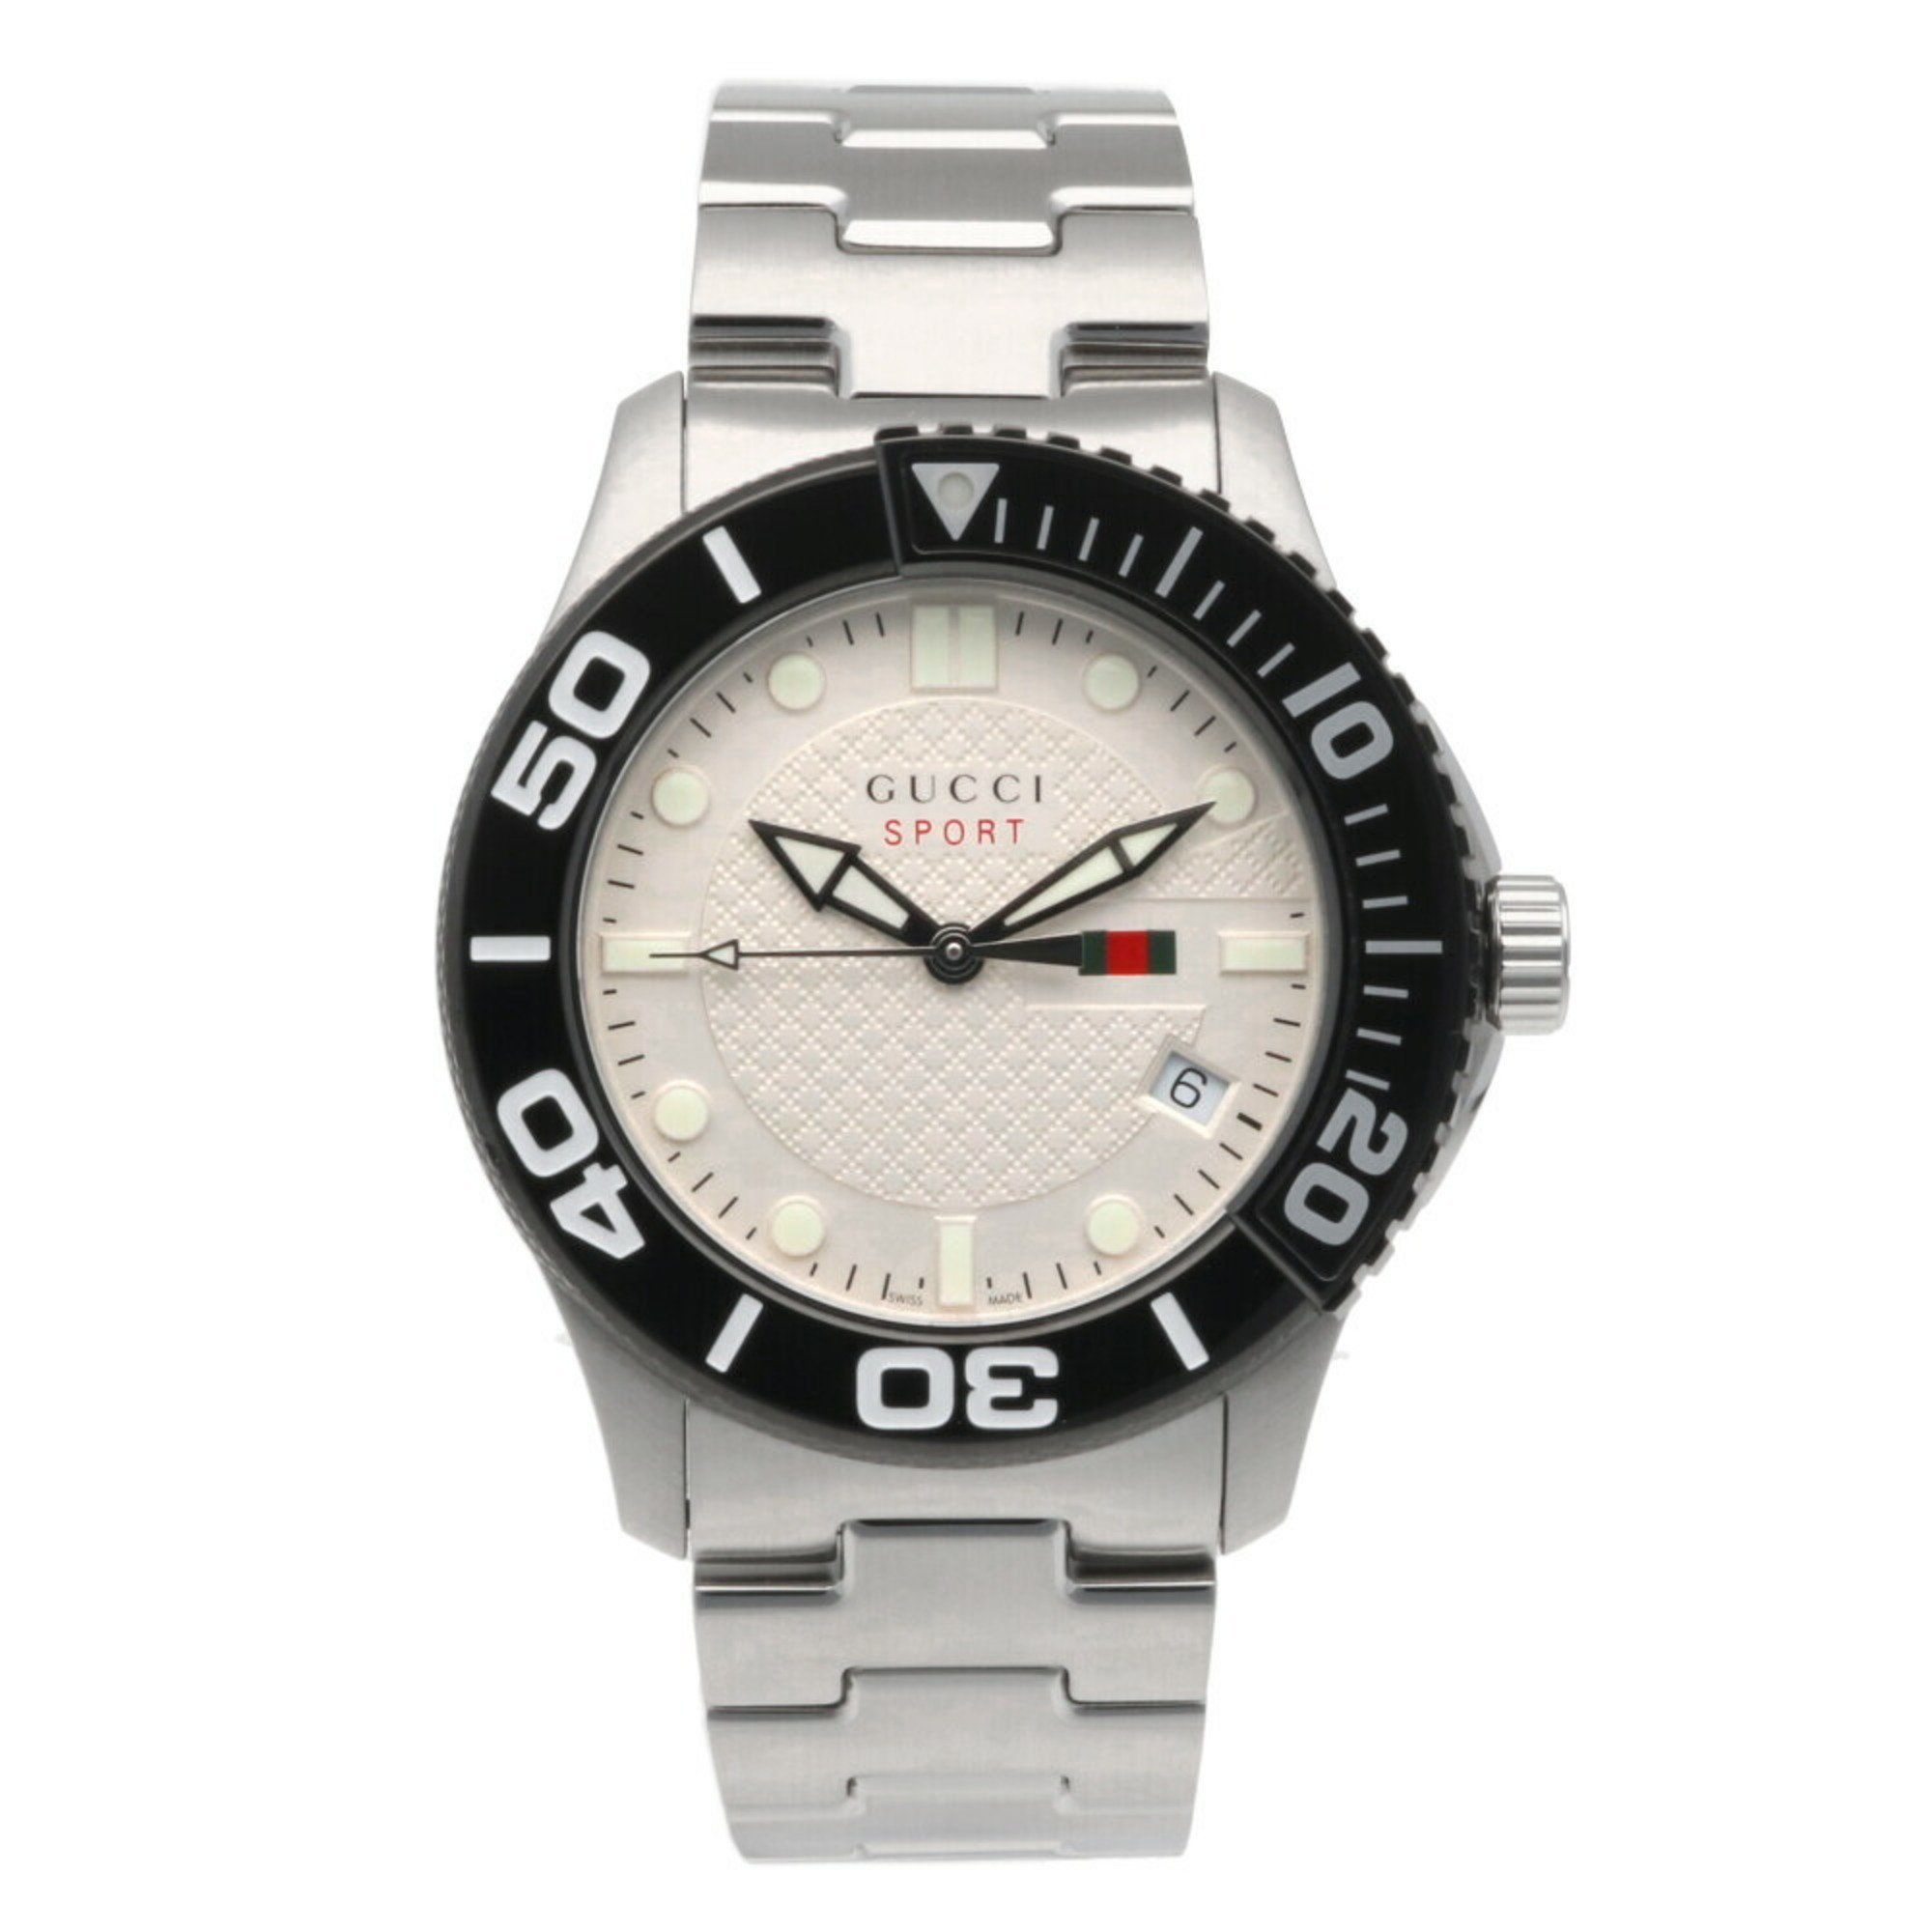 Gucci GUCCI G Timeless Watch Stainless Steel 126.2 Men's